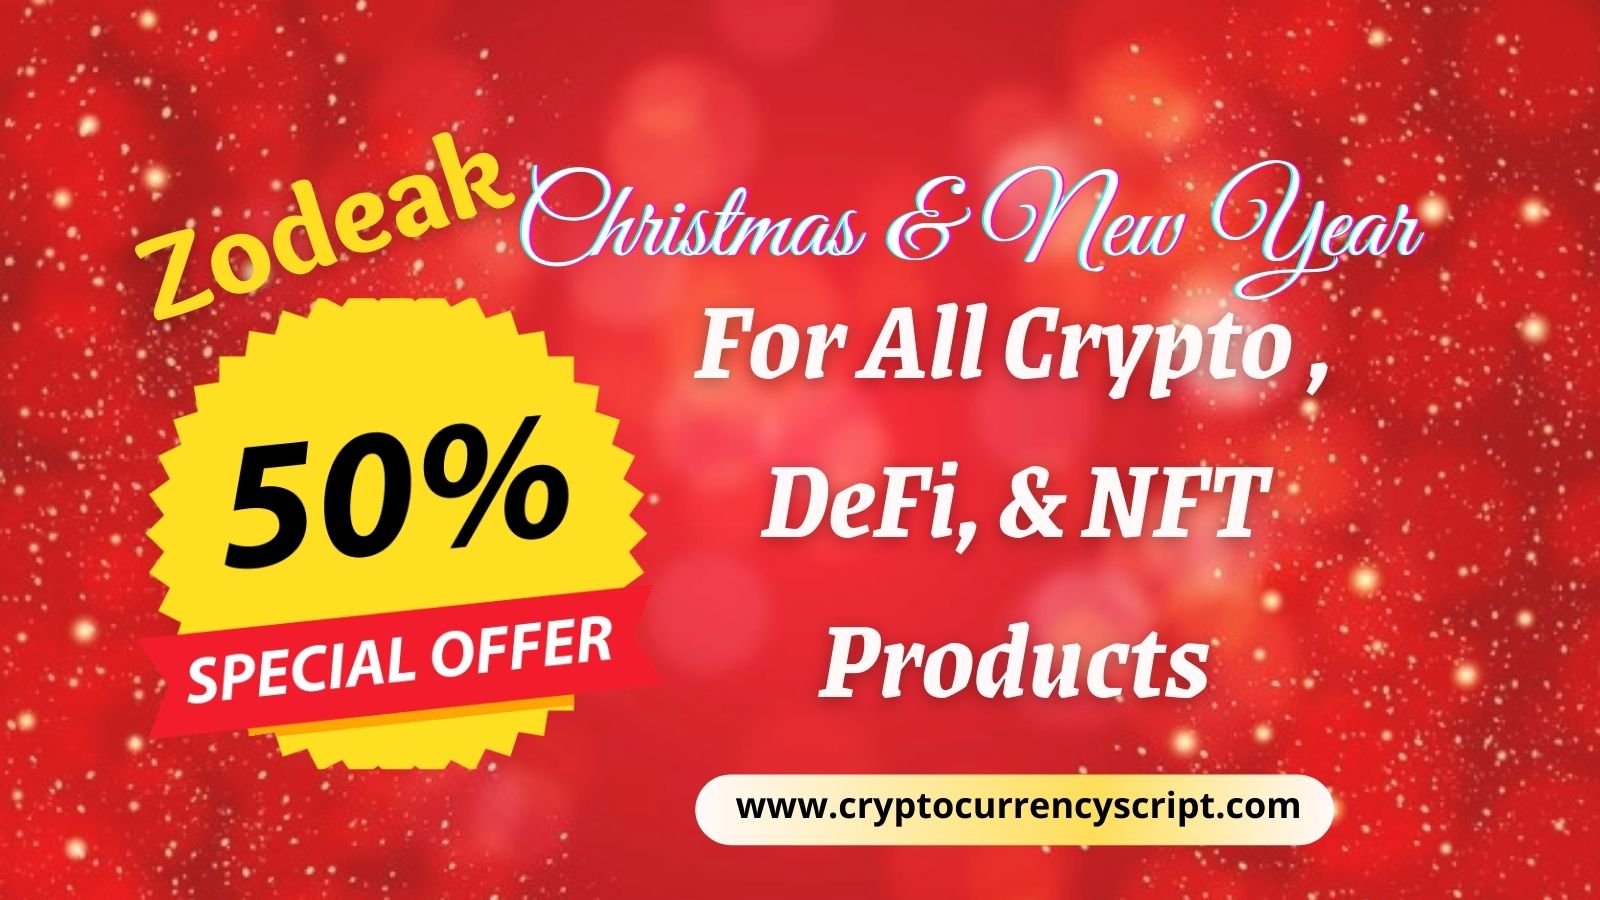 Zodeak Opens Up Christmas & New Year Deals for You!!!